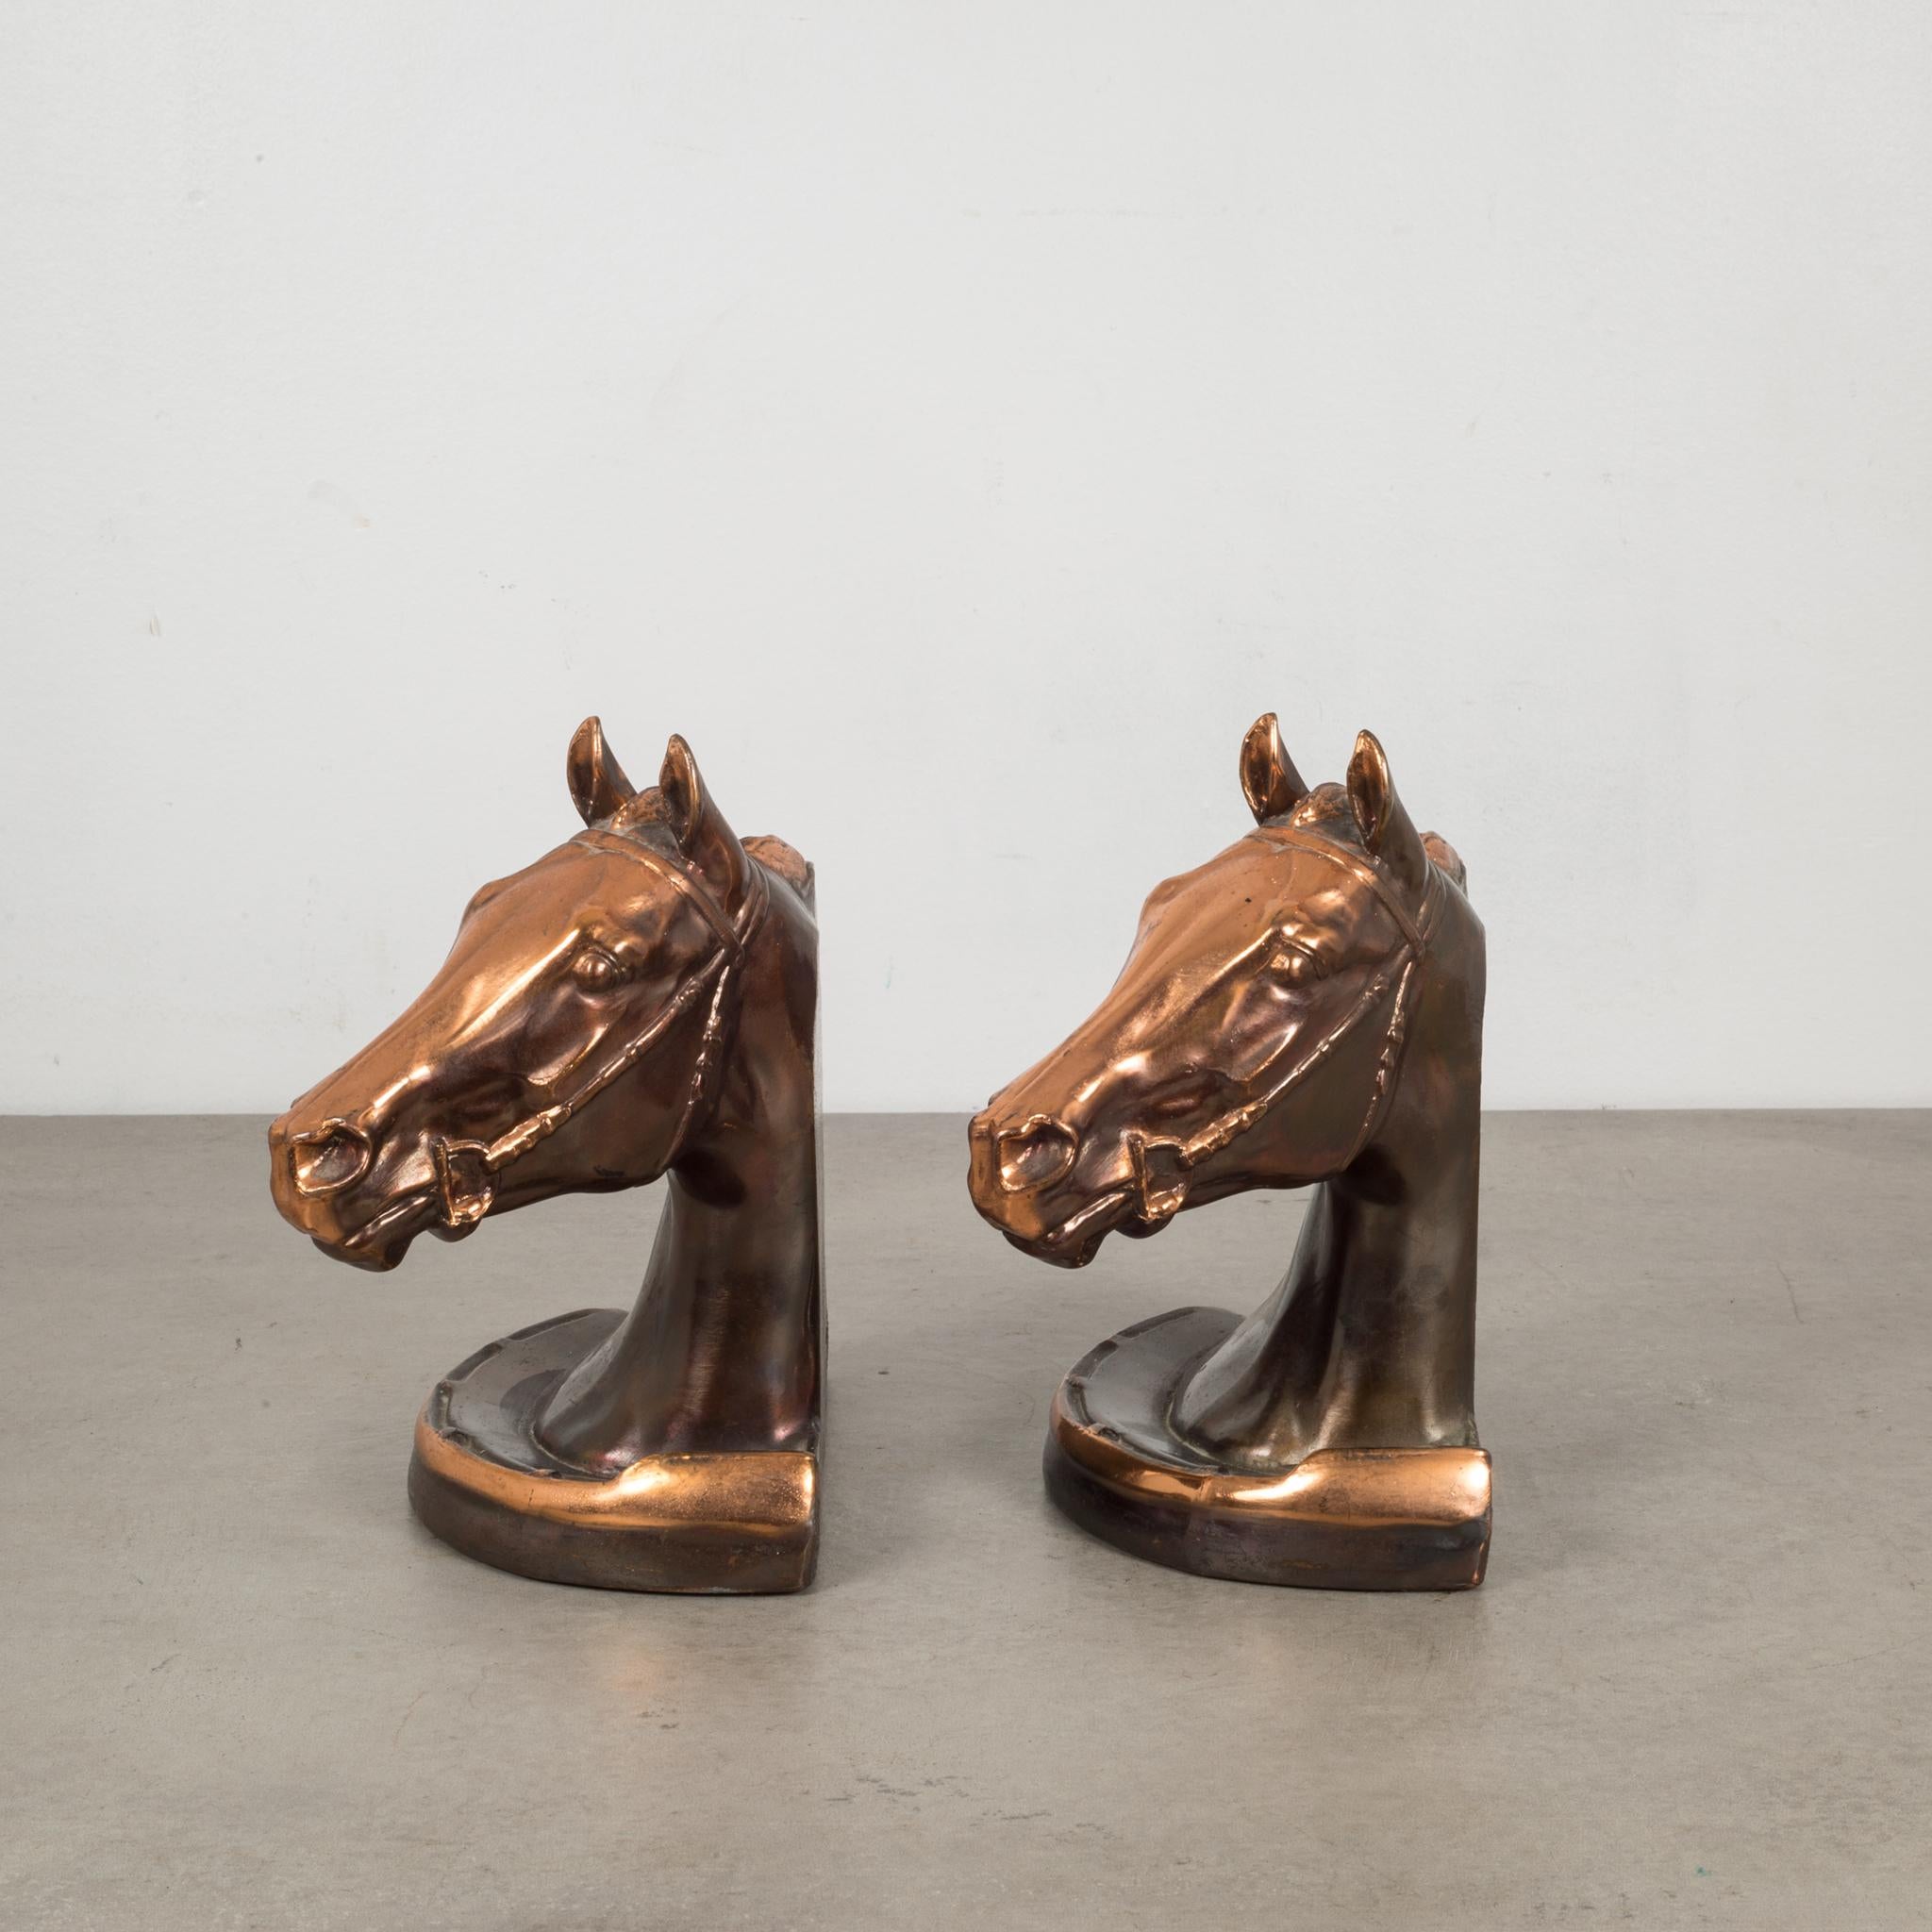 Art Deco Bronze-Plated Horse Head Bookends by Glady's Brown and Dodge, circa 1946